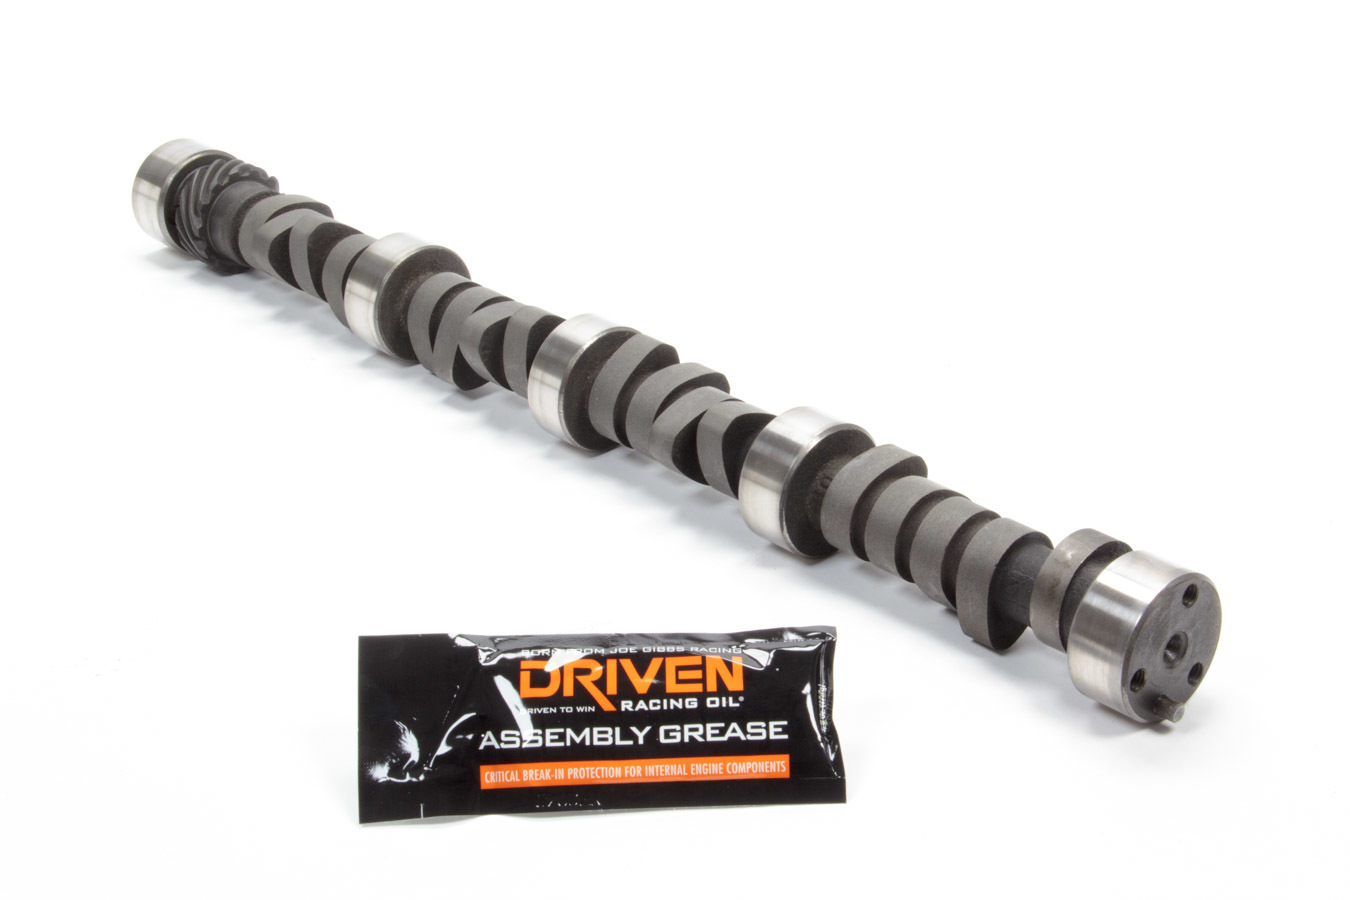 Howards Cams 112691-06 Camshaft, Oval Track Lift Rule, Hydraulic Flat Tappet, Lift 0.450 / 0.450 in, Duration 284 / 284, 106 LSA, 2500 / 6600 RPM, Small Block Chevy, Each